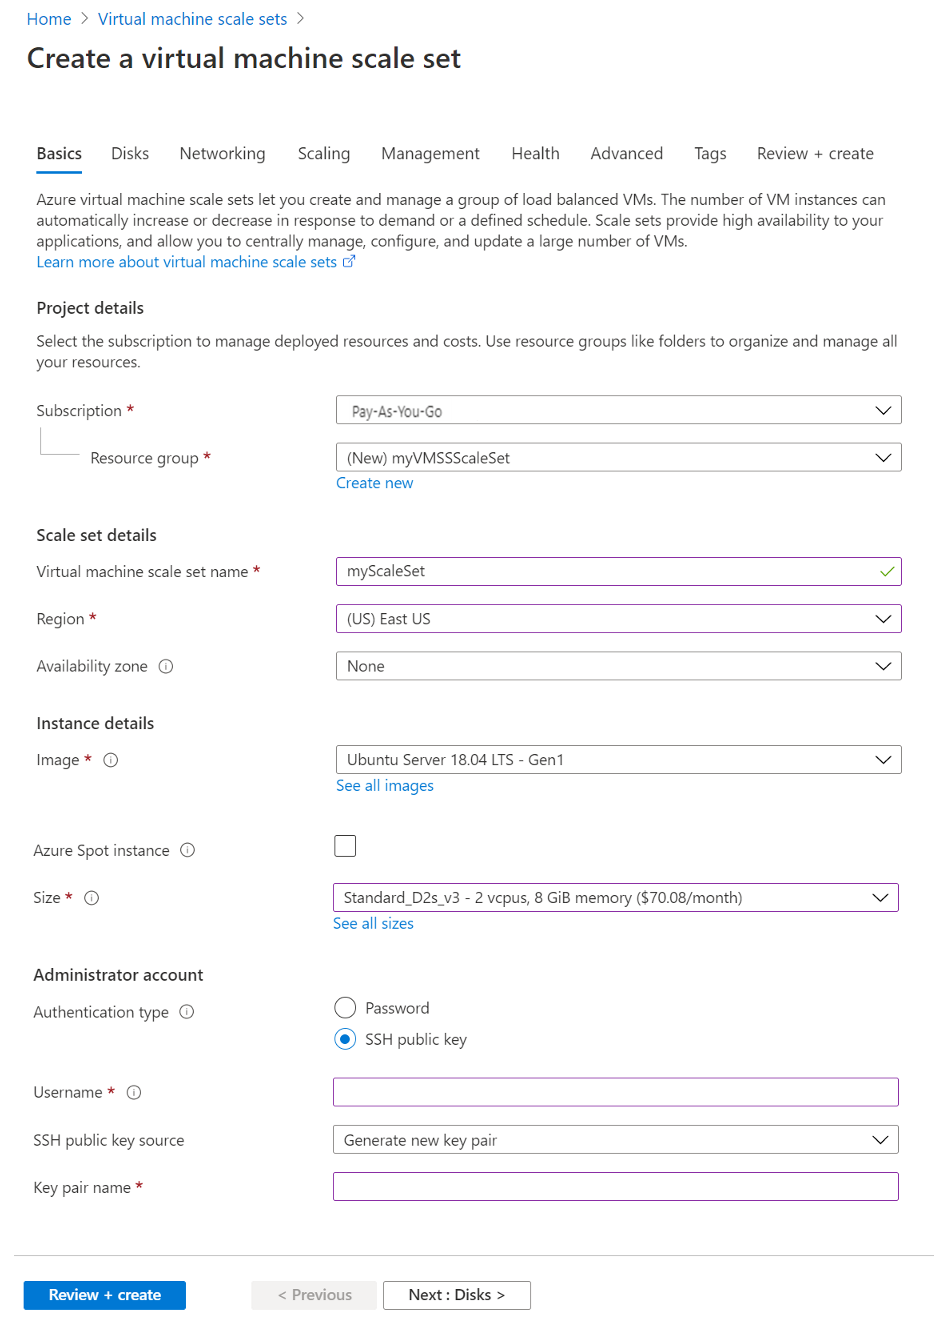 Image shows create options for scale sets in the Azure portal.